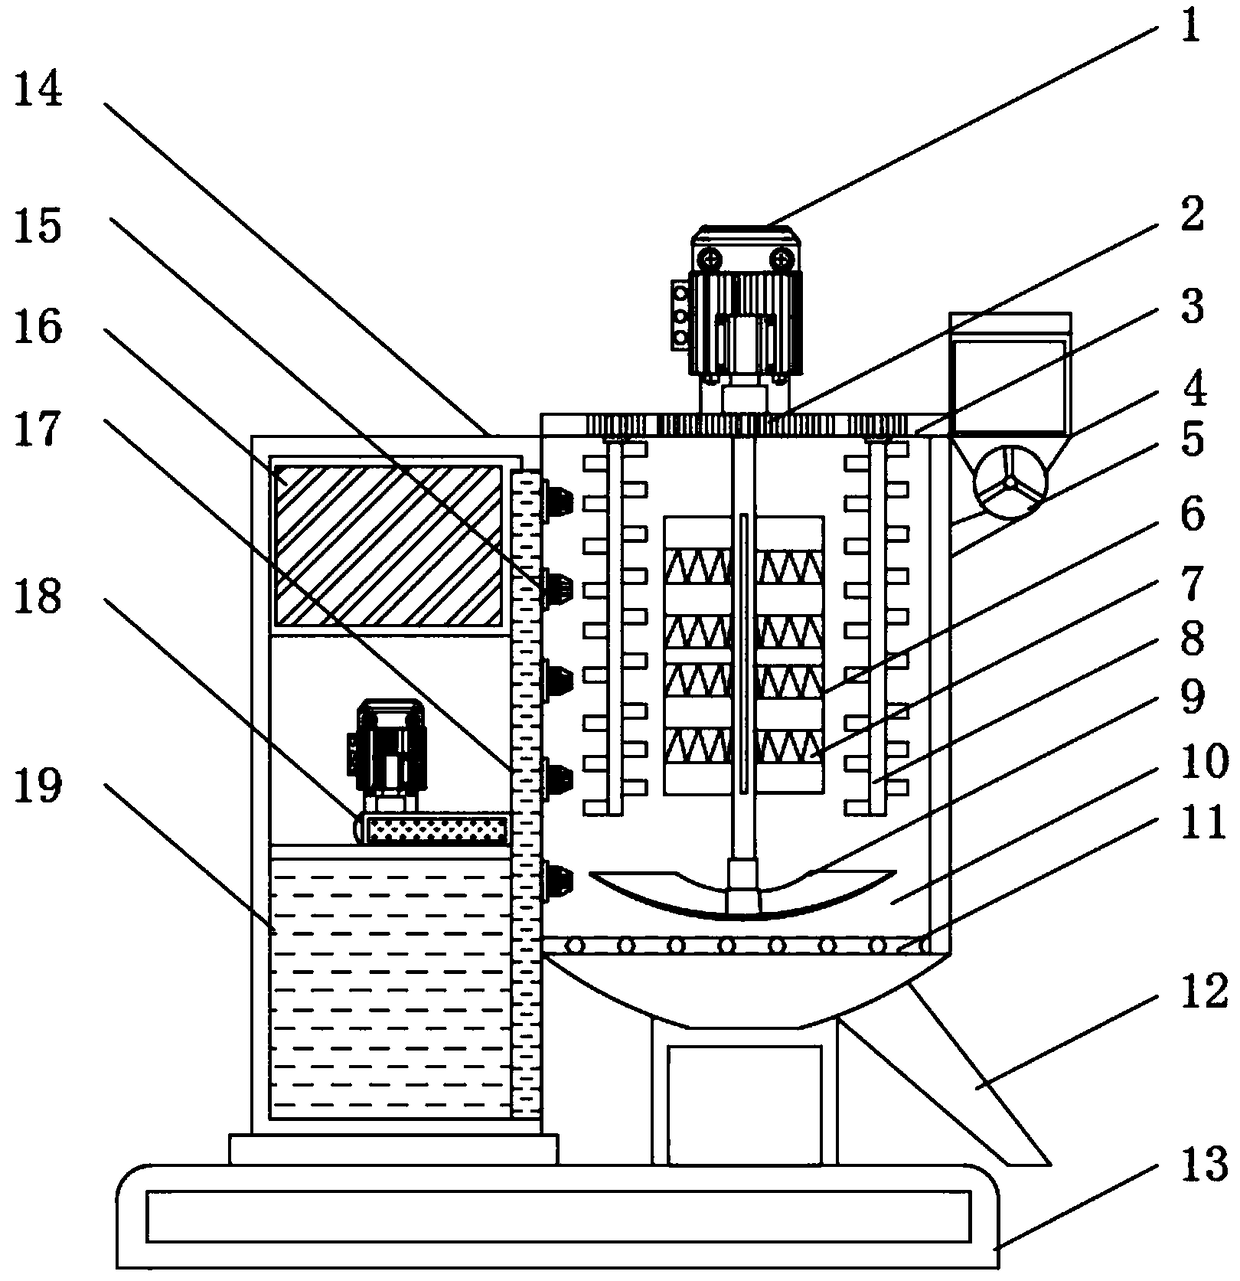 Raw material stirring and mixing device for bond paper production